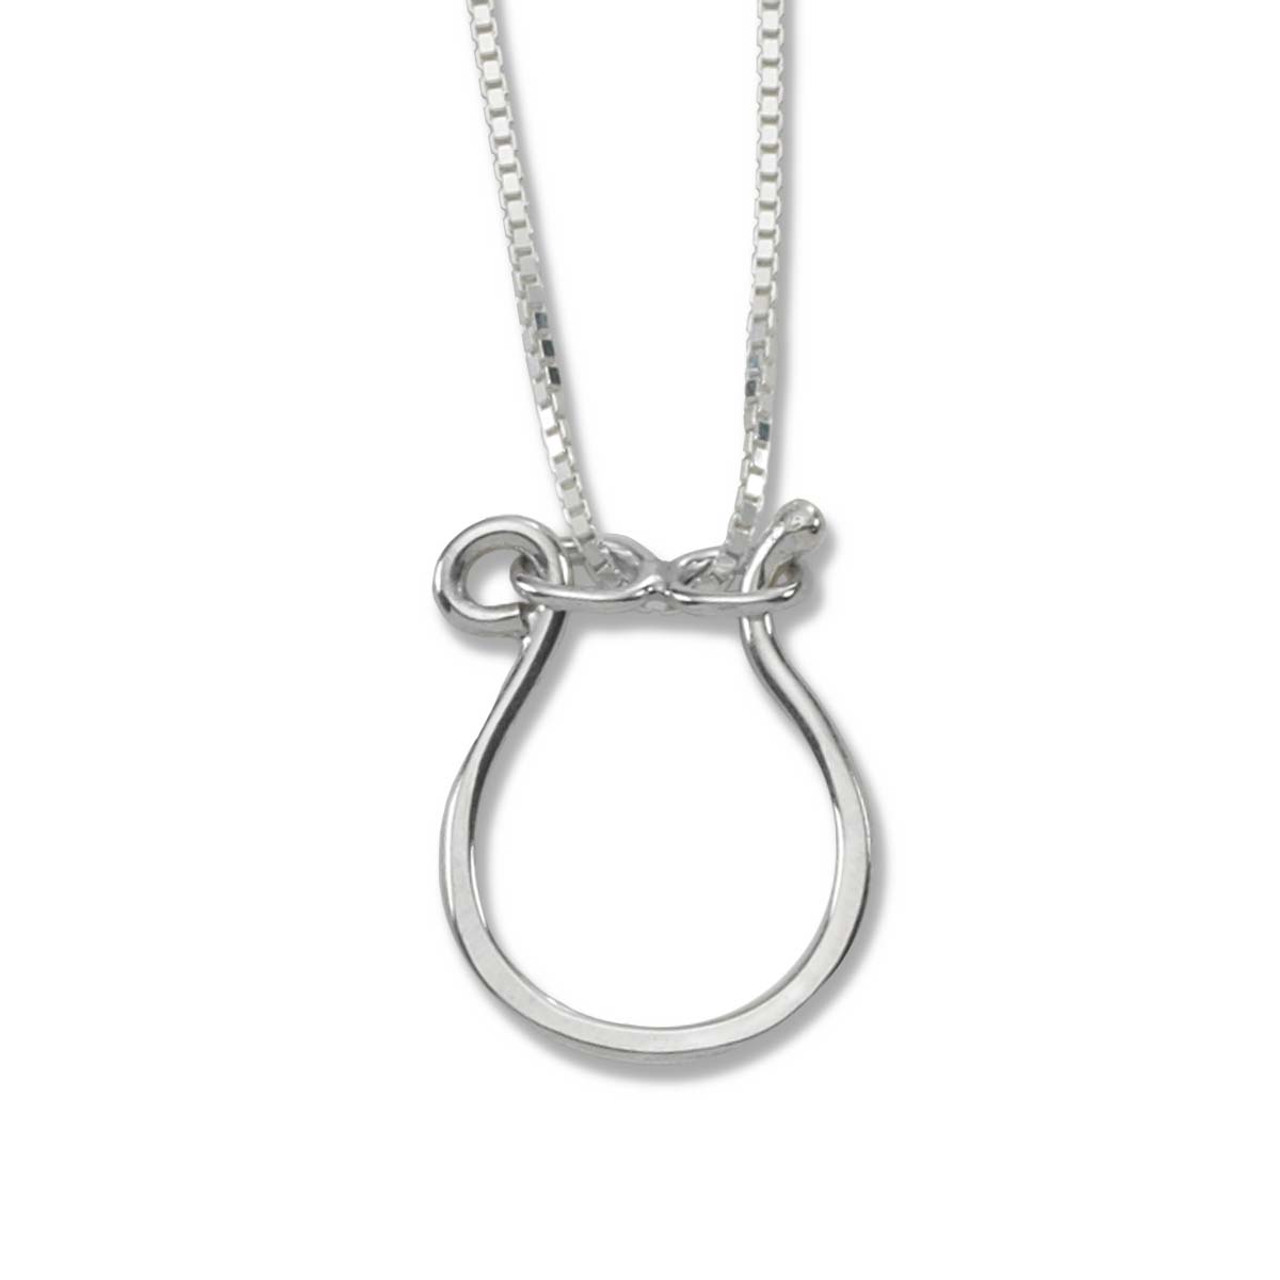 James Avery Changeable Charm Holder Necklace | CoolSprings Galleria